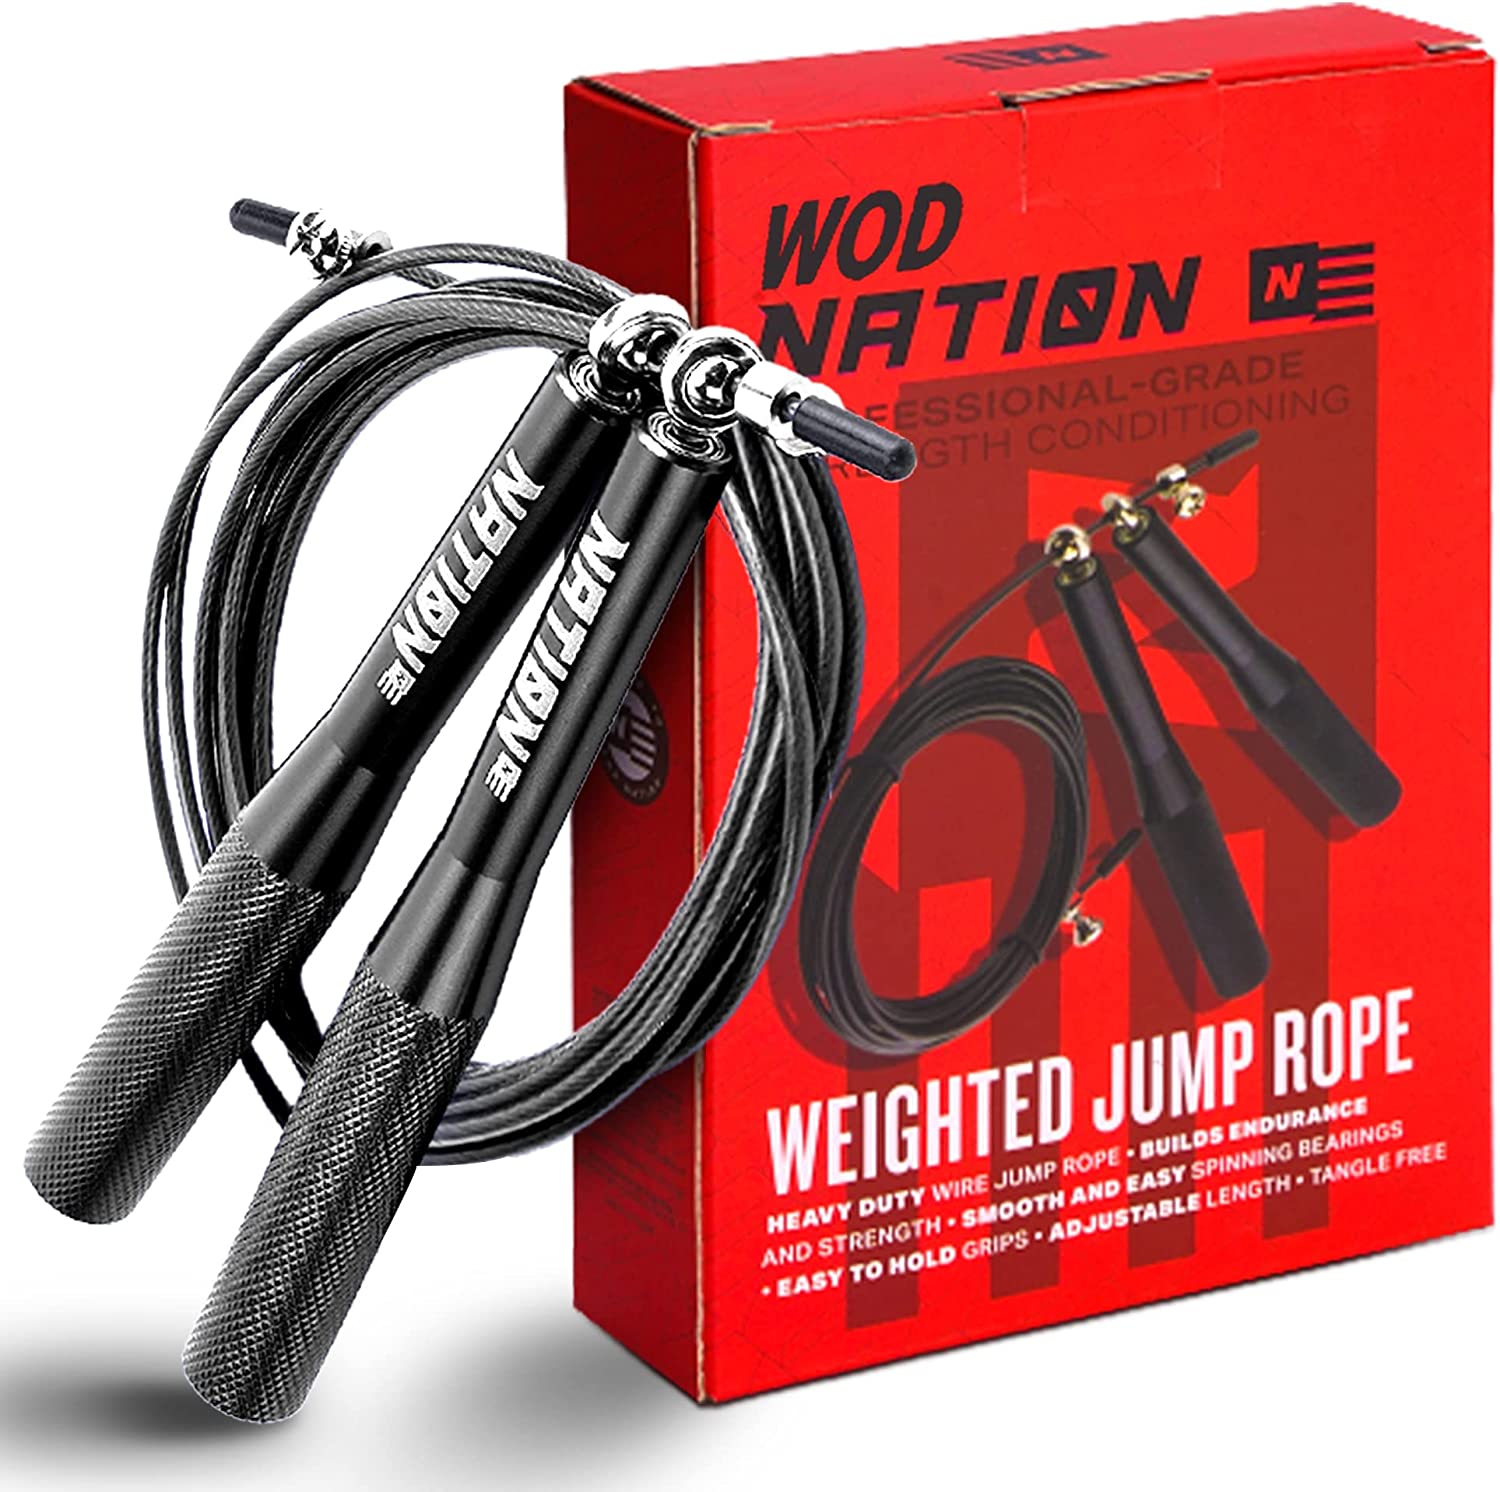 WOD Nation Speed Jump Rope for Women and Men – Aluminum Handle Jump Rope, Crossfit Jump Rope, Boxing Jump Rope, Fitness Jump Rope, Workout Rope, Jumping Rope – Adjustable Jump Ropes for Fitness